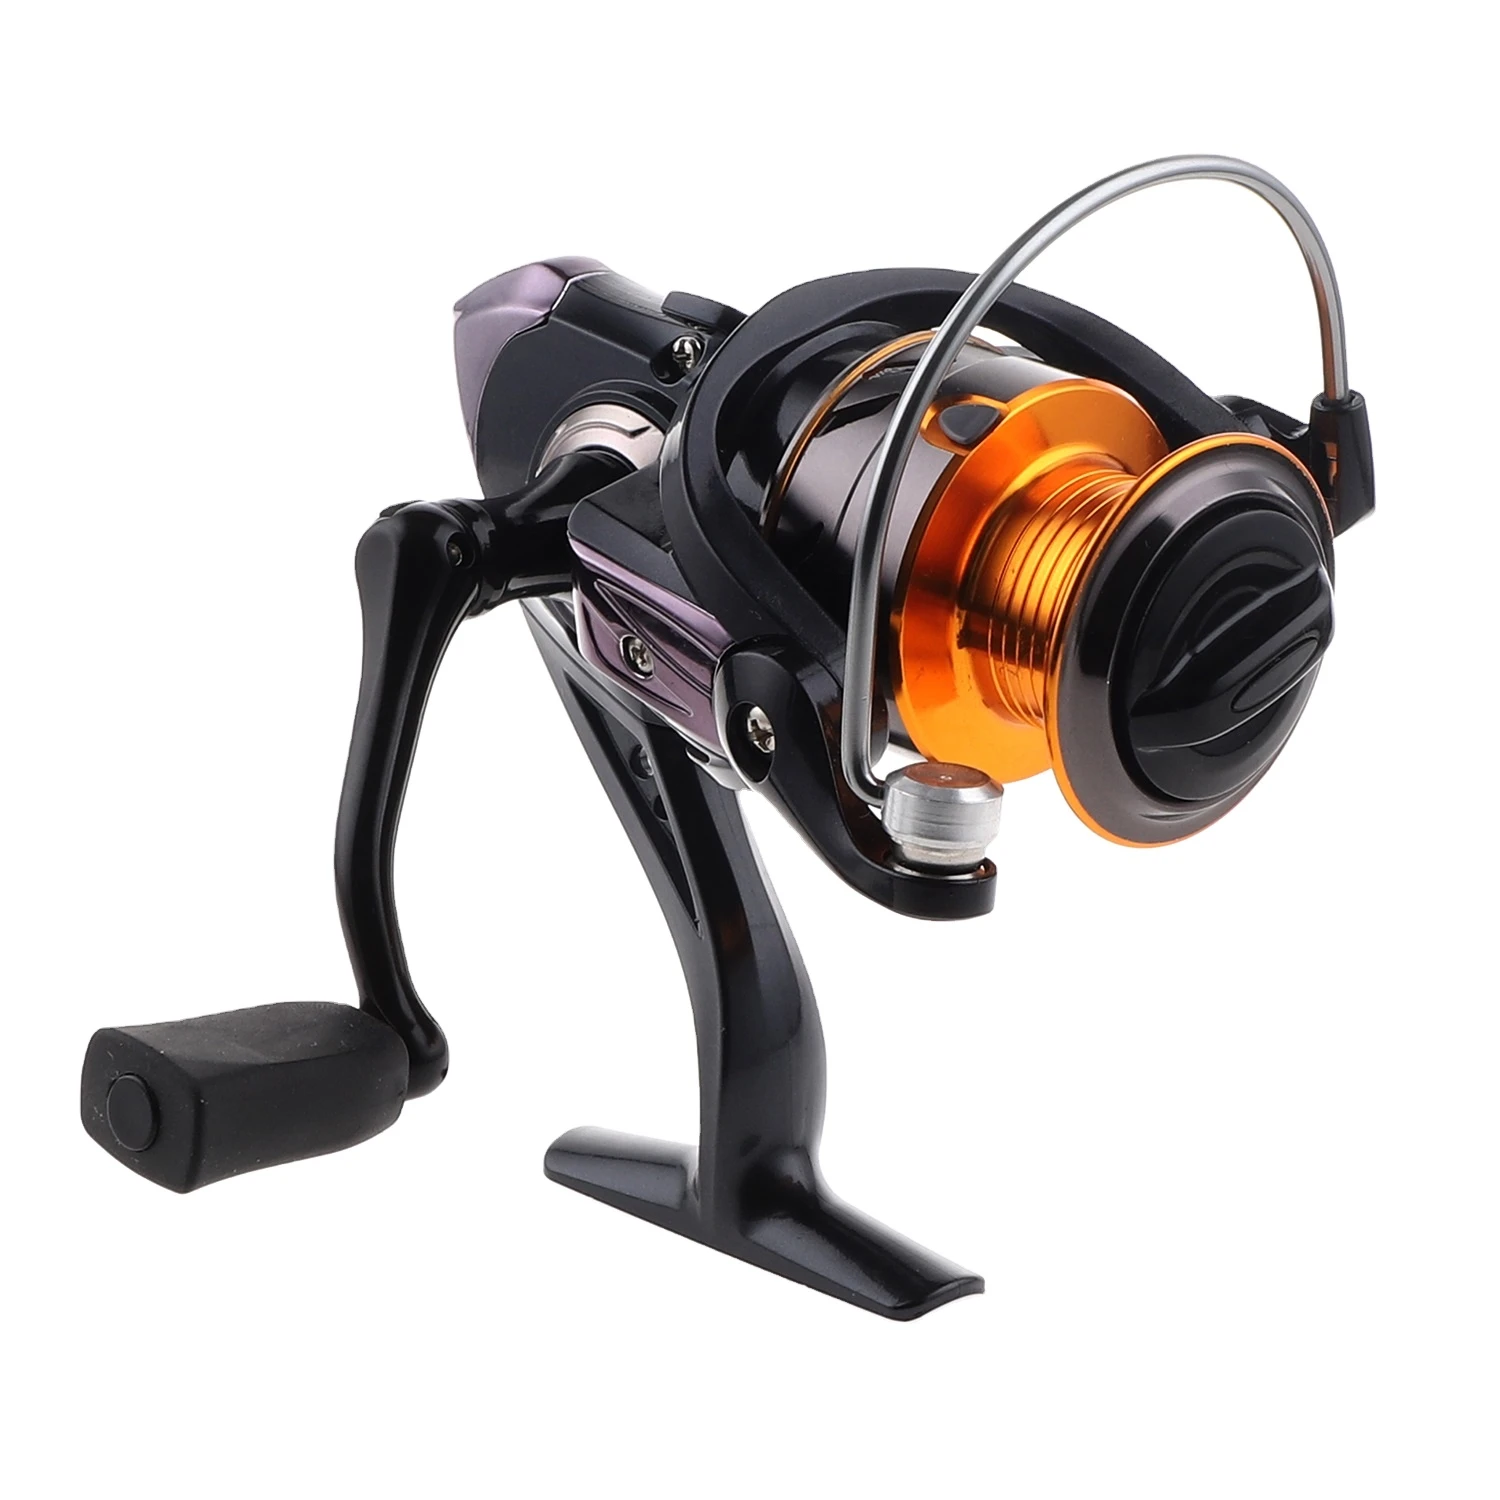 Competitive one way clutch New type top sale good quality spinning reel cheap fishing reels